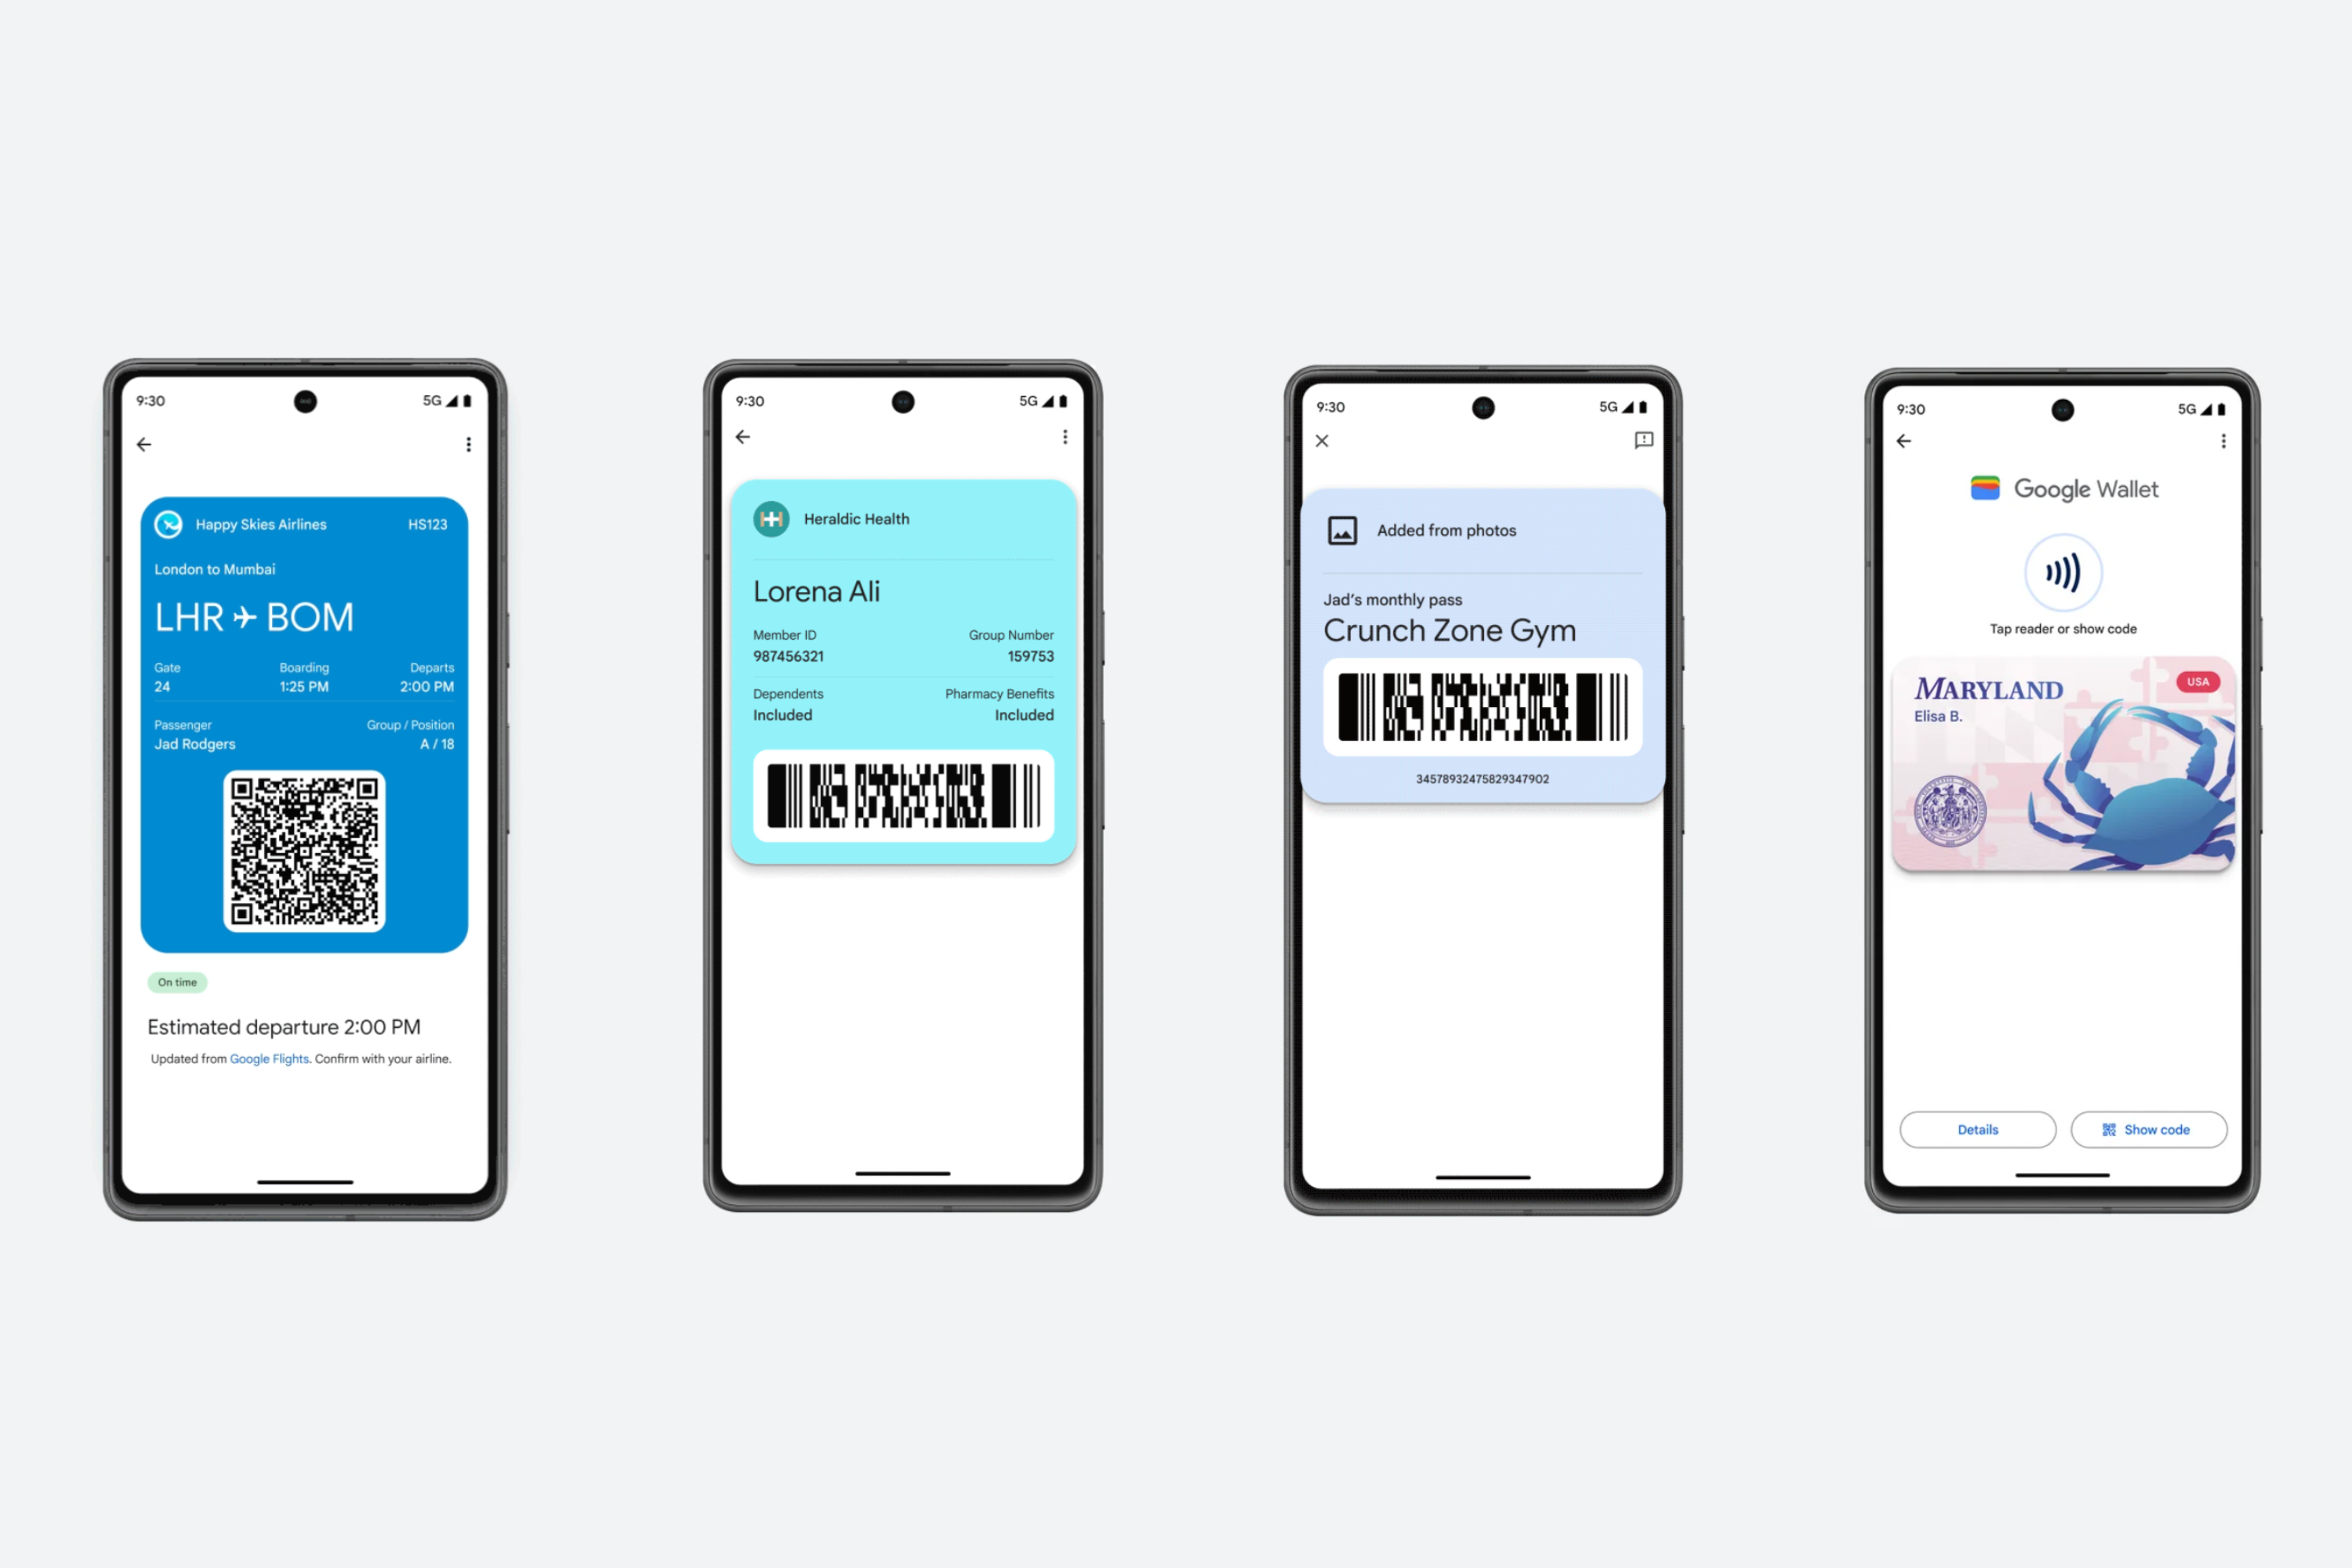 Google Wallet’s newest update gives more reasons to leave your pocketbook at home